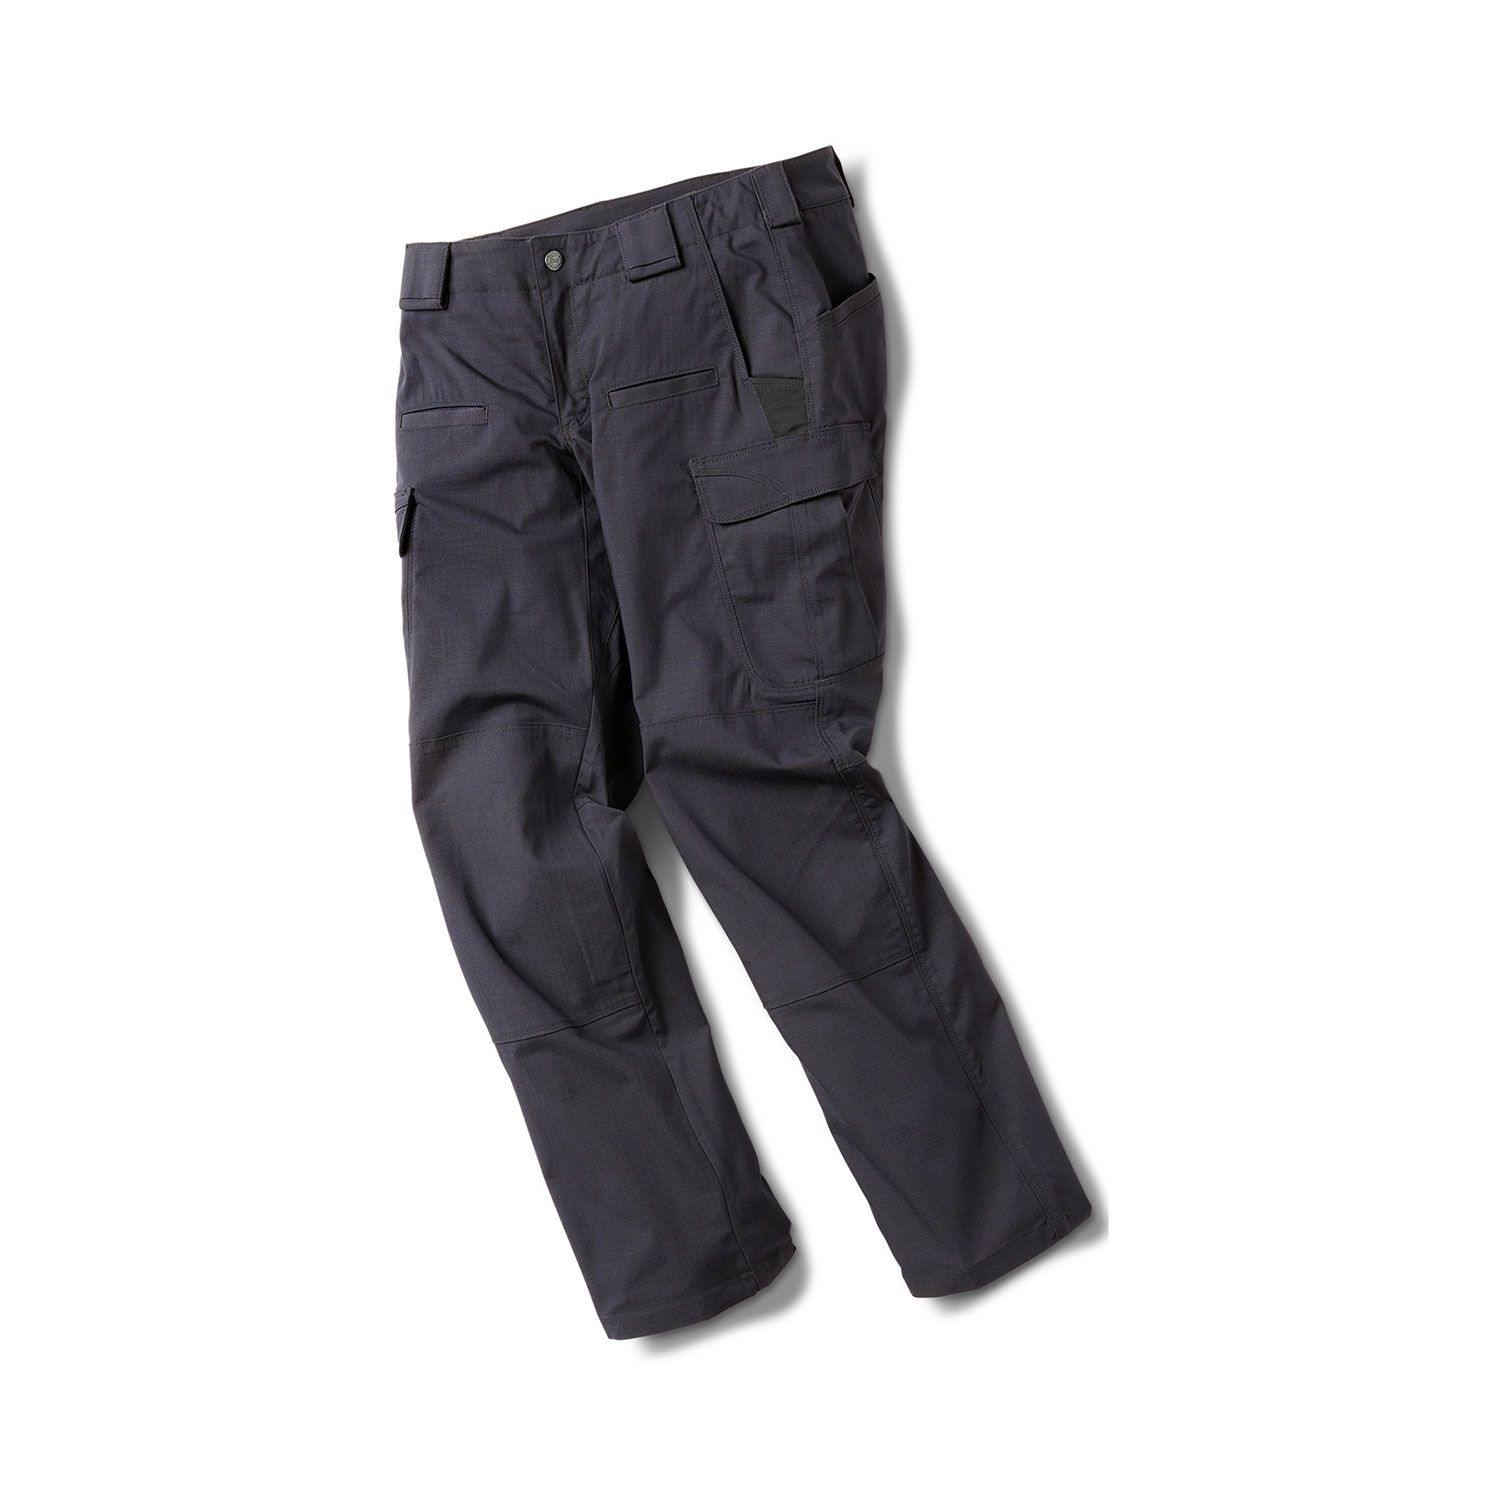 5.11 Tactical Womens NYPD Ripstop Stryke Pant